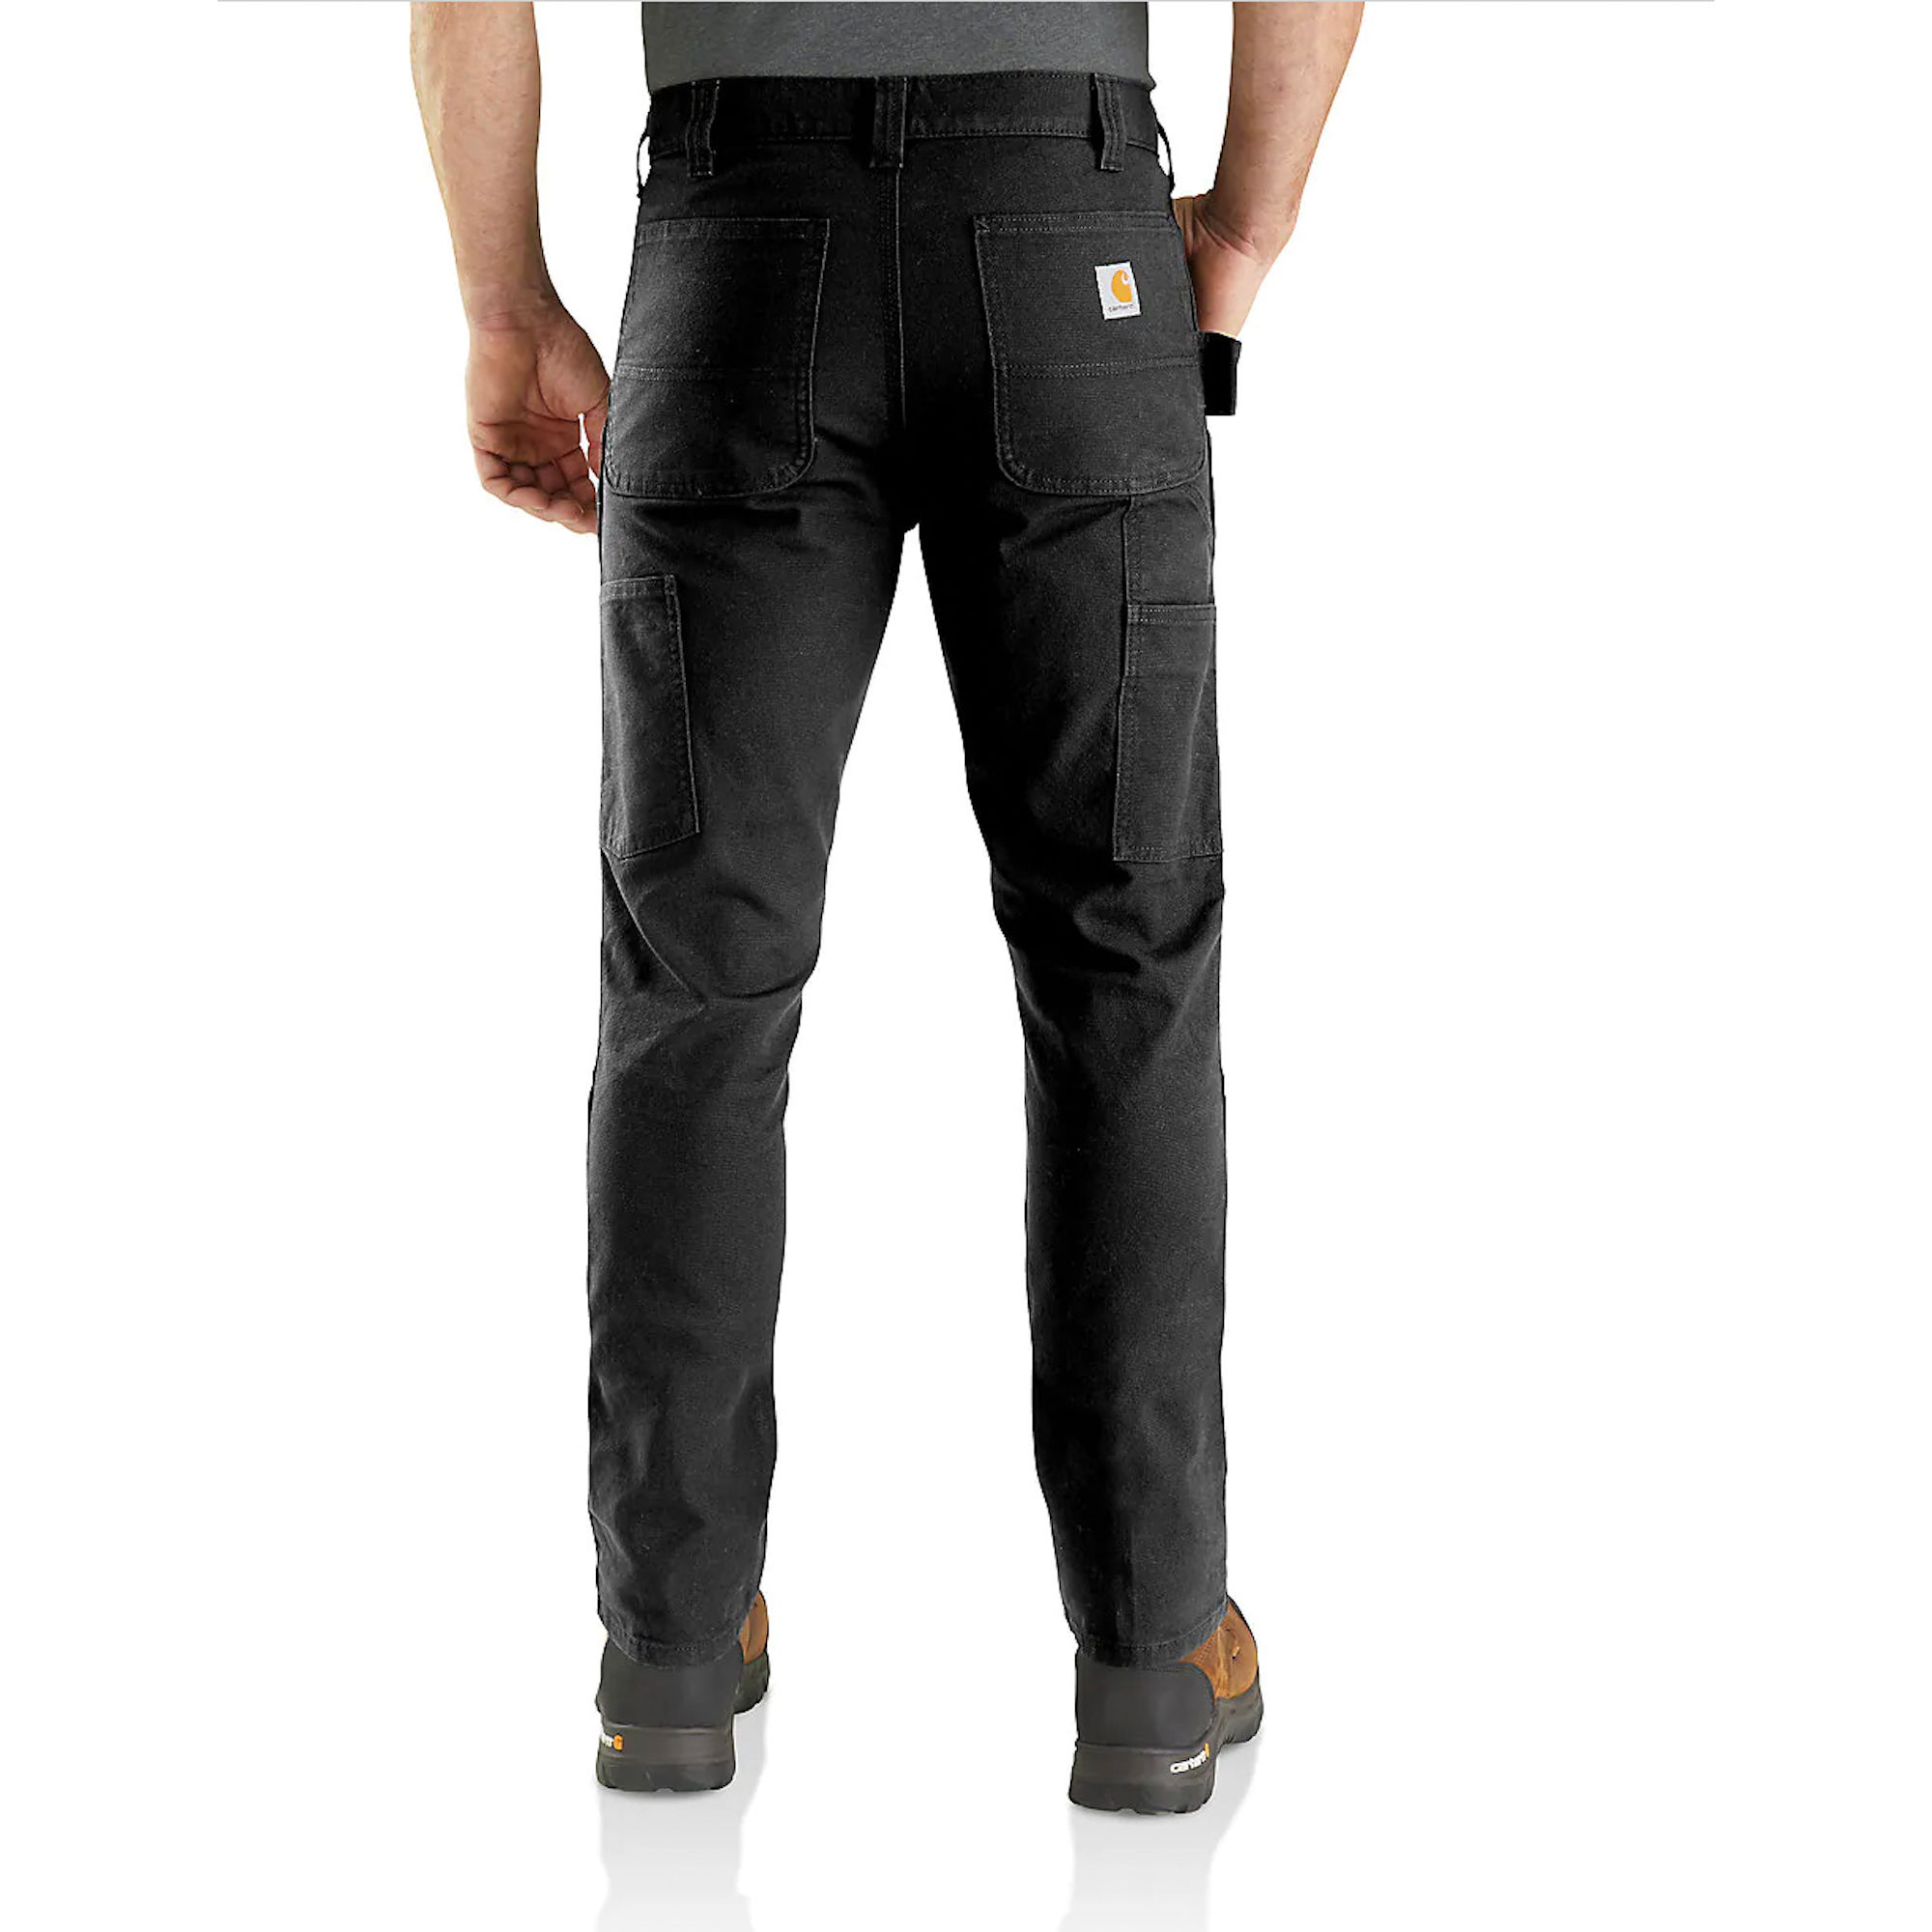 LOOSE FIT FIRM DUCK DOUBLEFRONT UTILITY WORK PANT  Carhartt